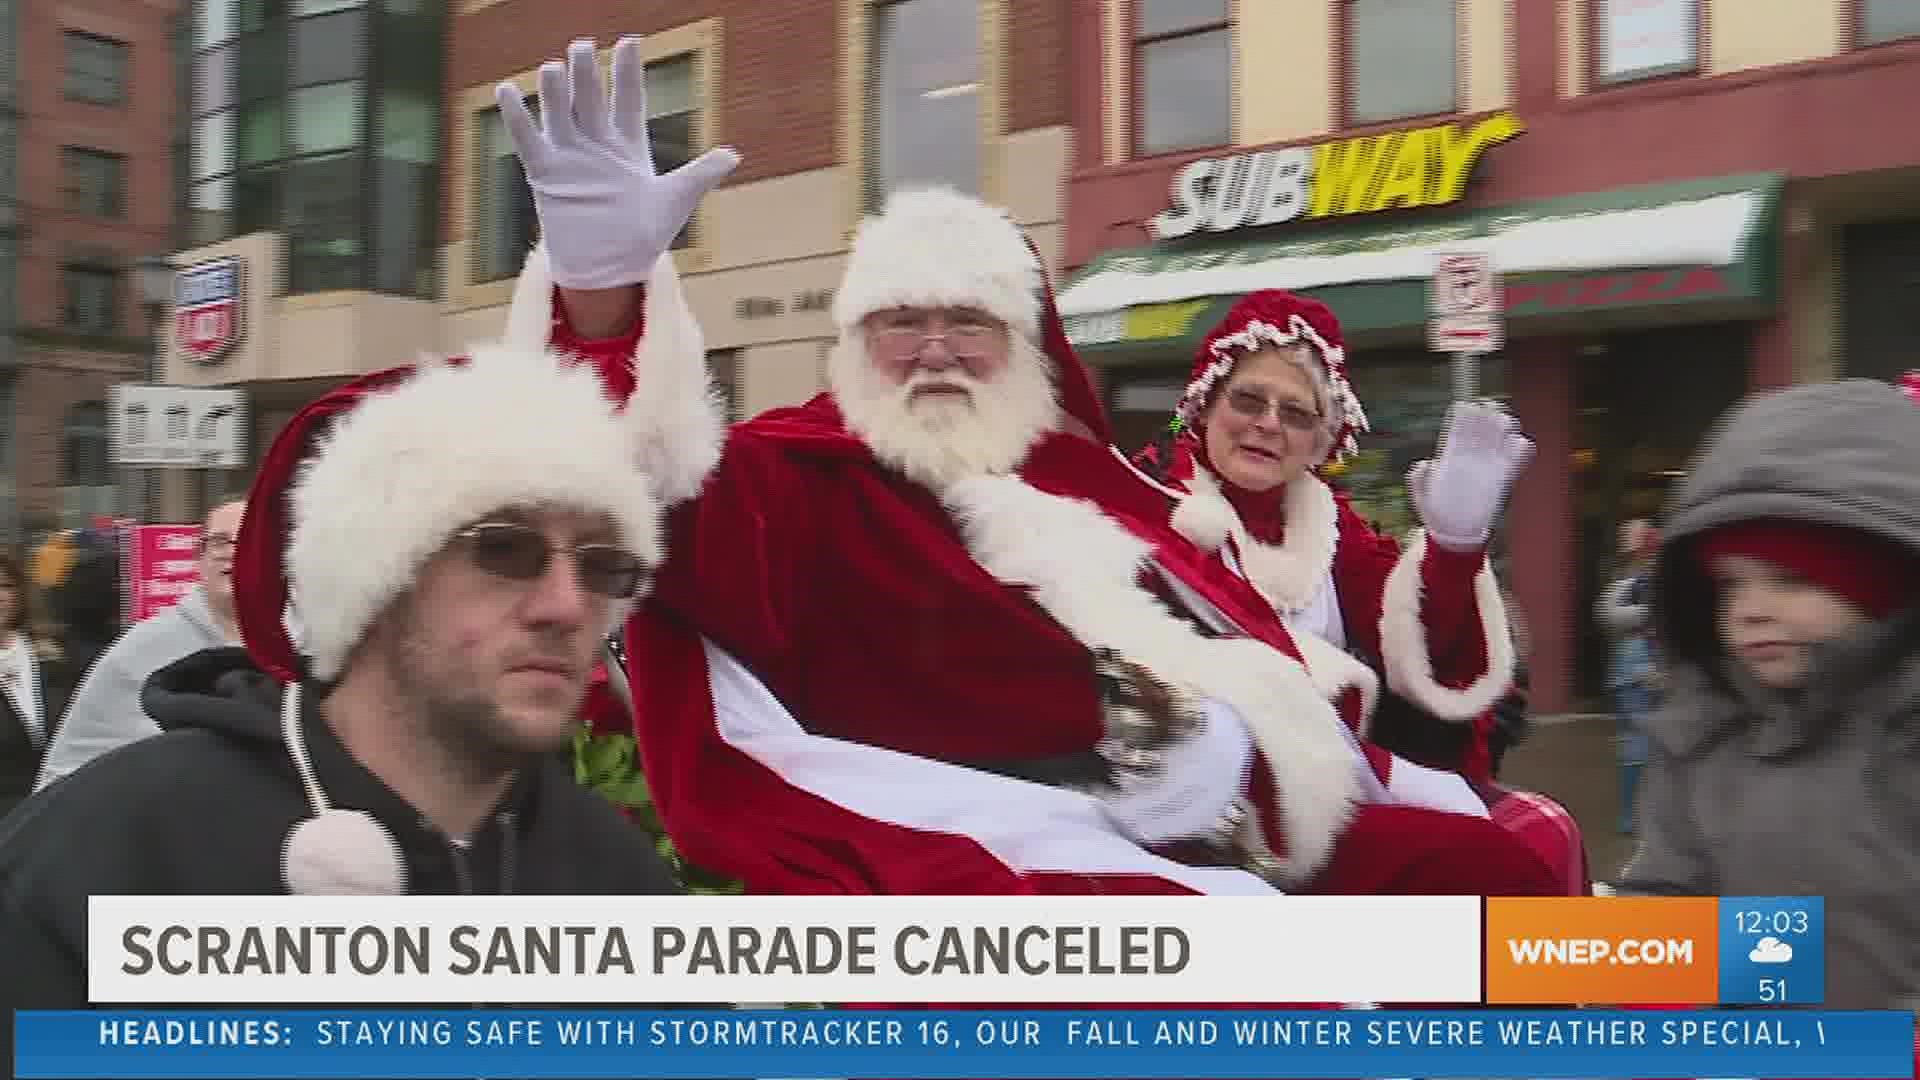 This year's Santa Parade in downtown Scranton has been canceled due to the ongoing pandemic.